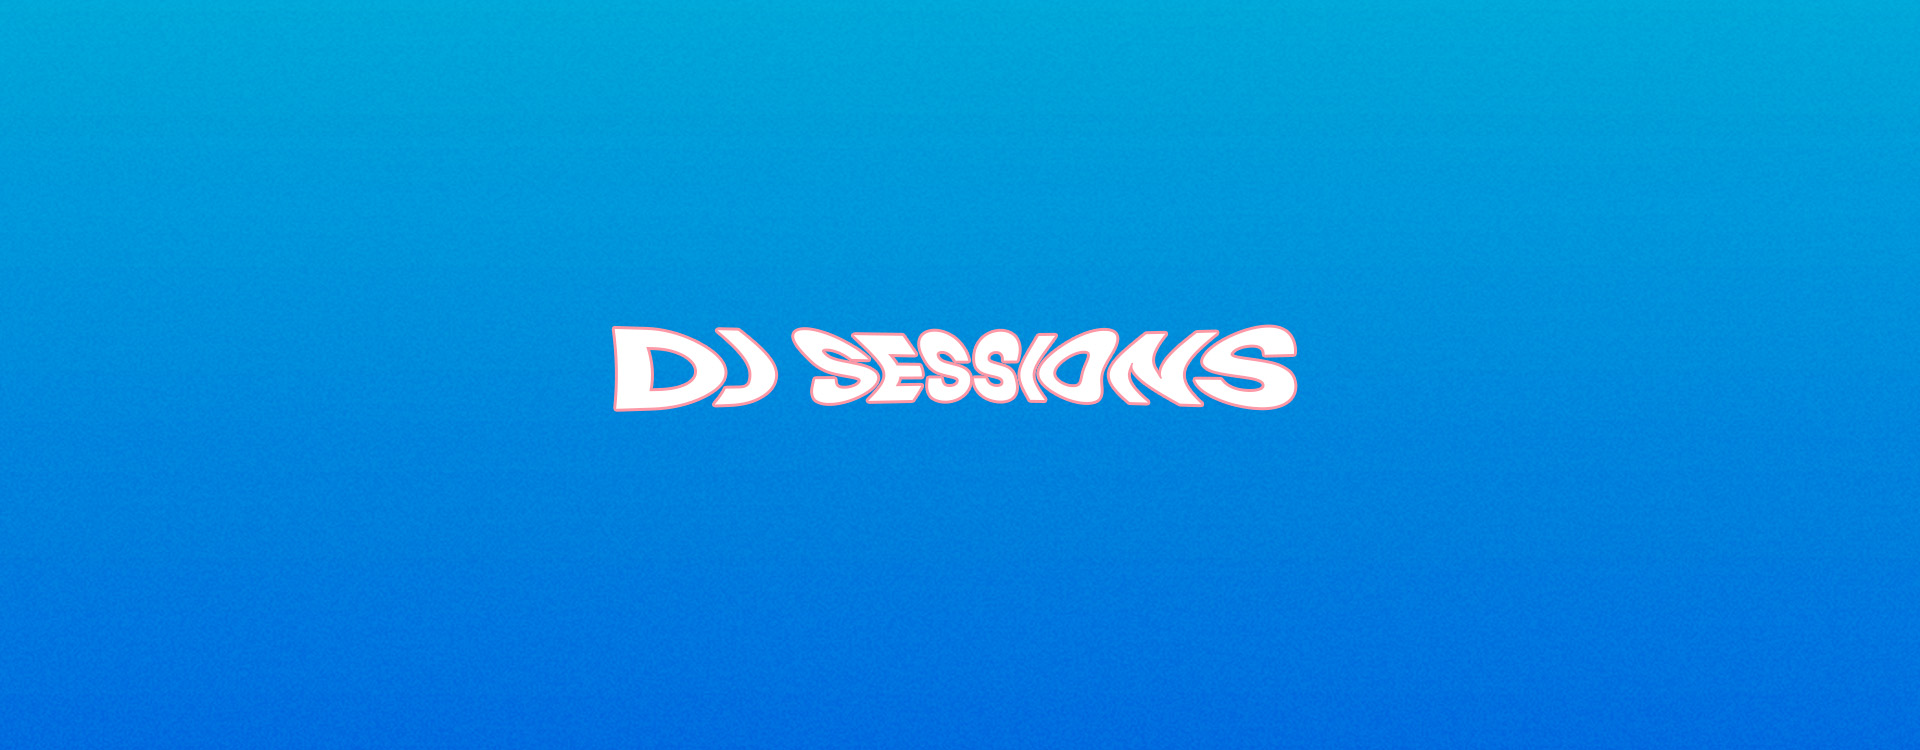 DJ Sessions for the website